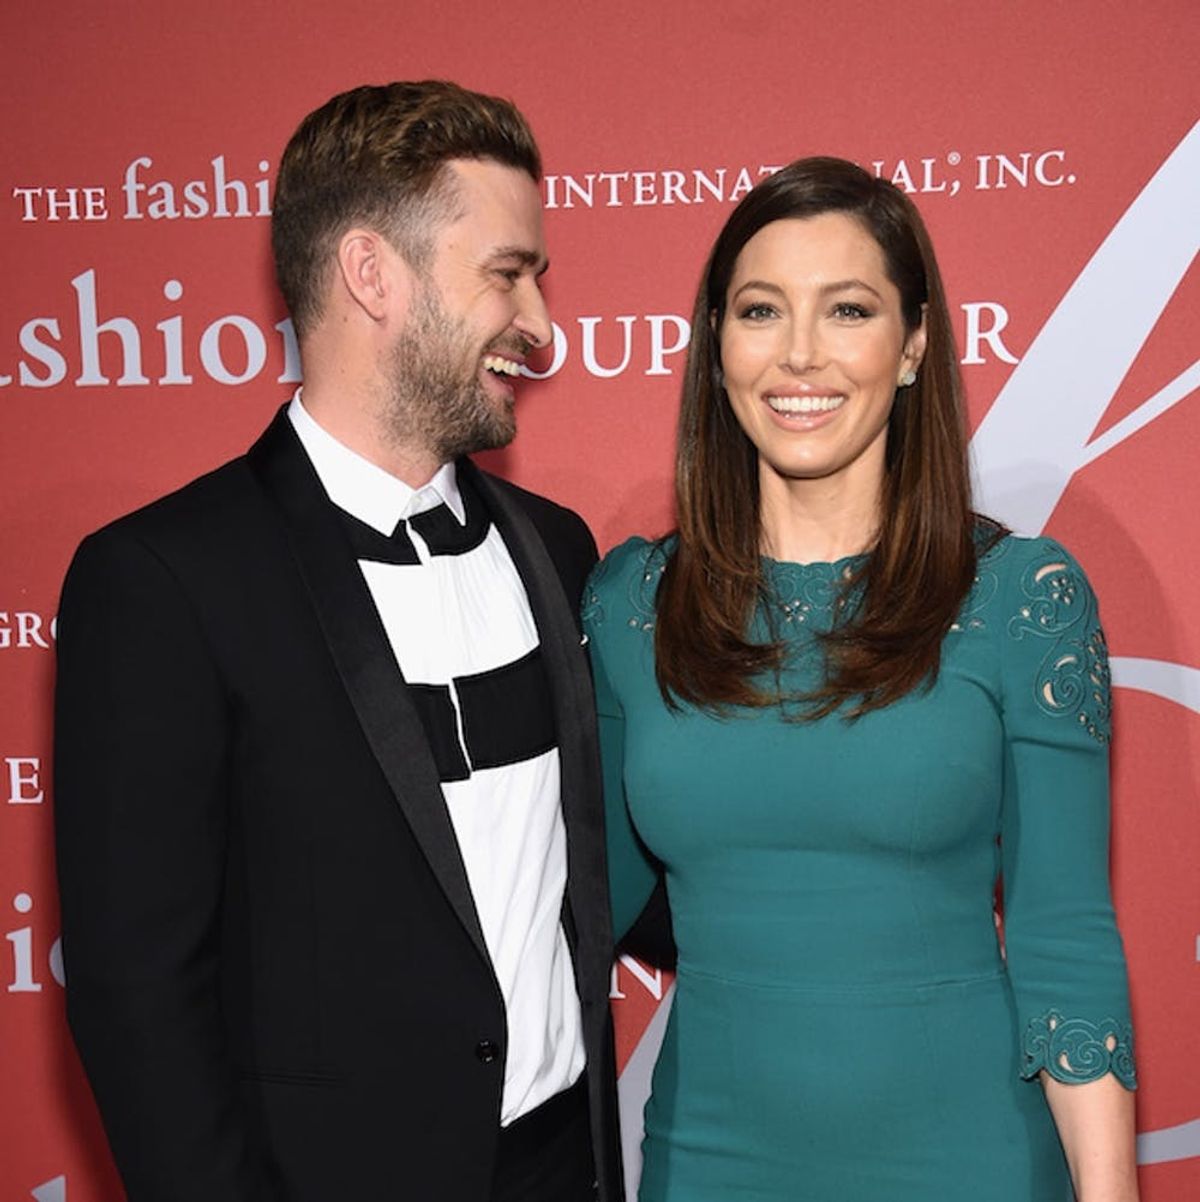 Morning Buzz! Justin Timberlake Will Make You Swoon With This Birthday Message to Wife Jessica Biel + More